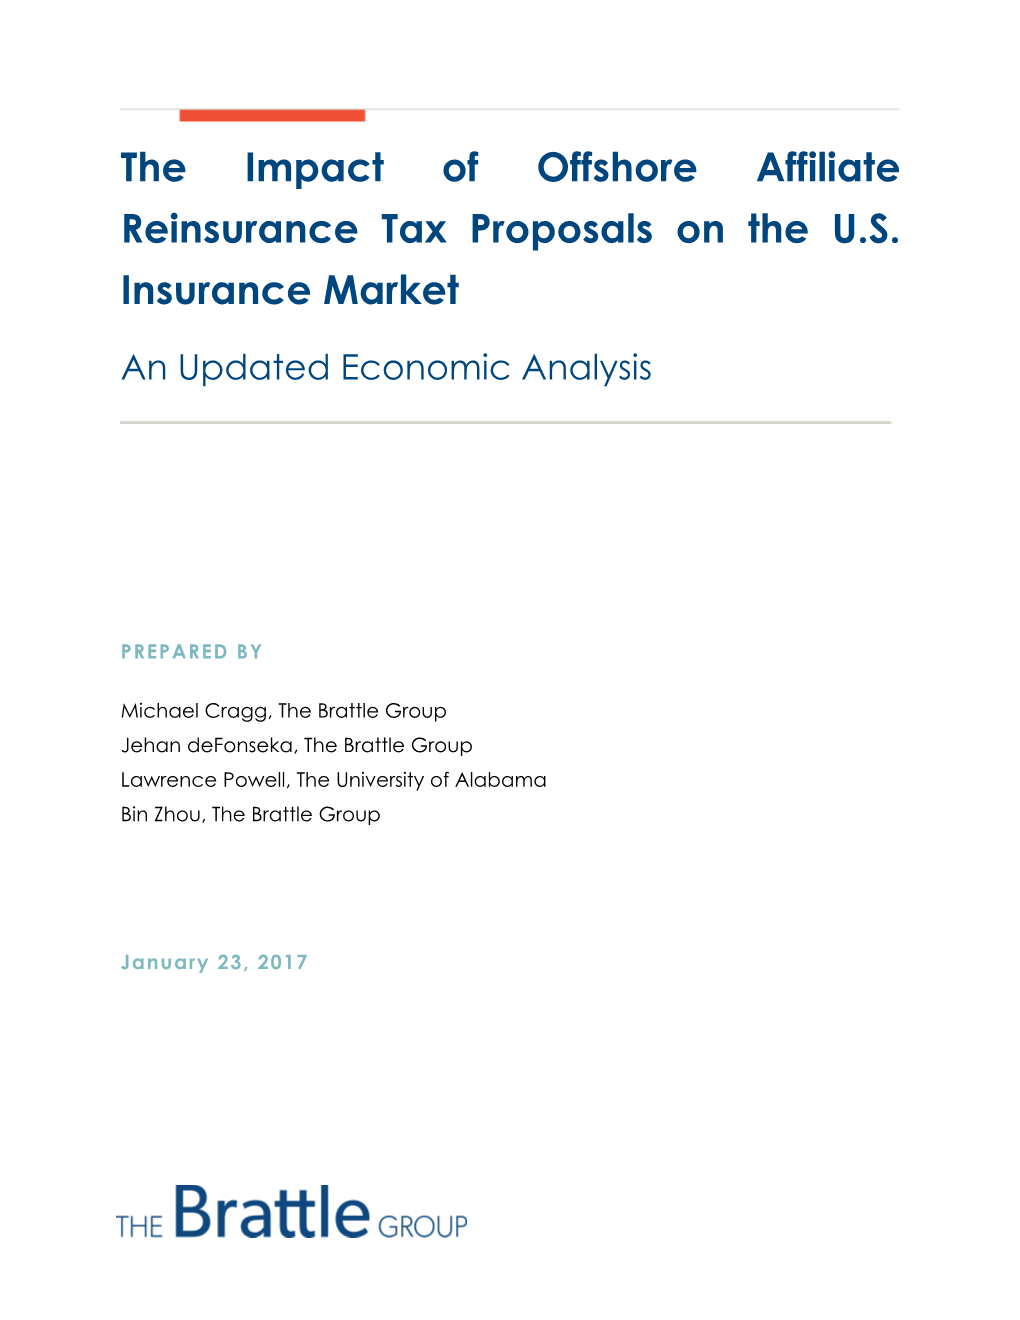 The Impact of Offshore Affiliate Reinsurance Tax Proposals on the U.S